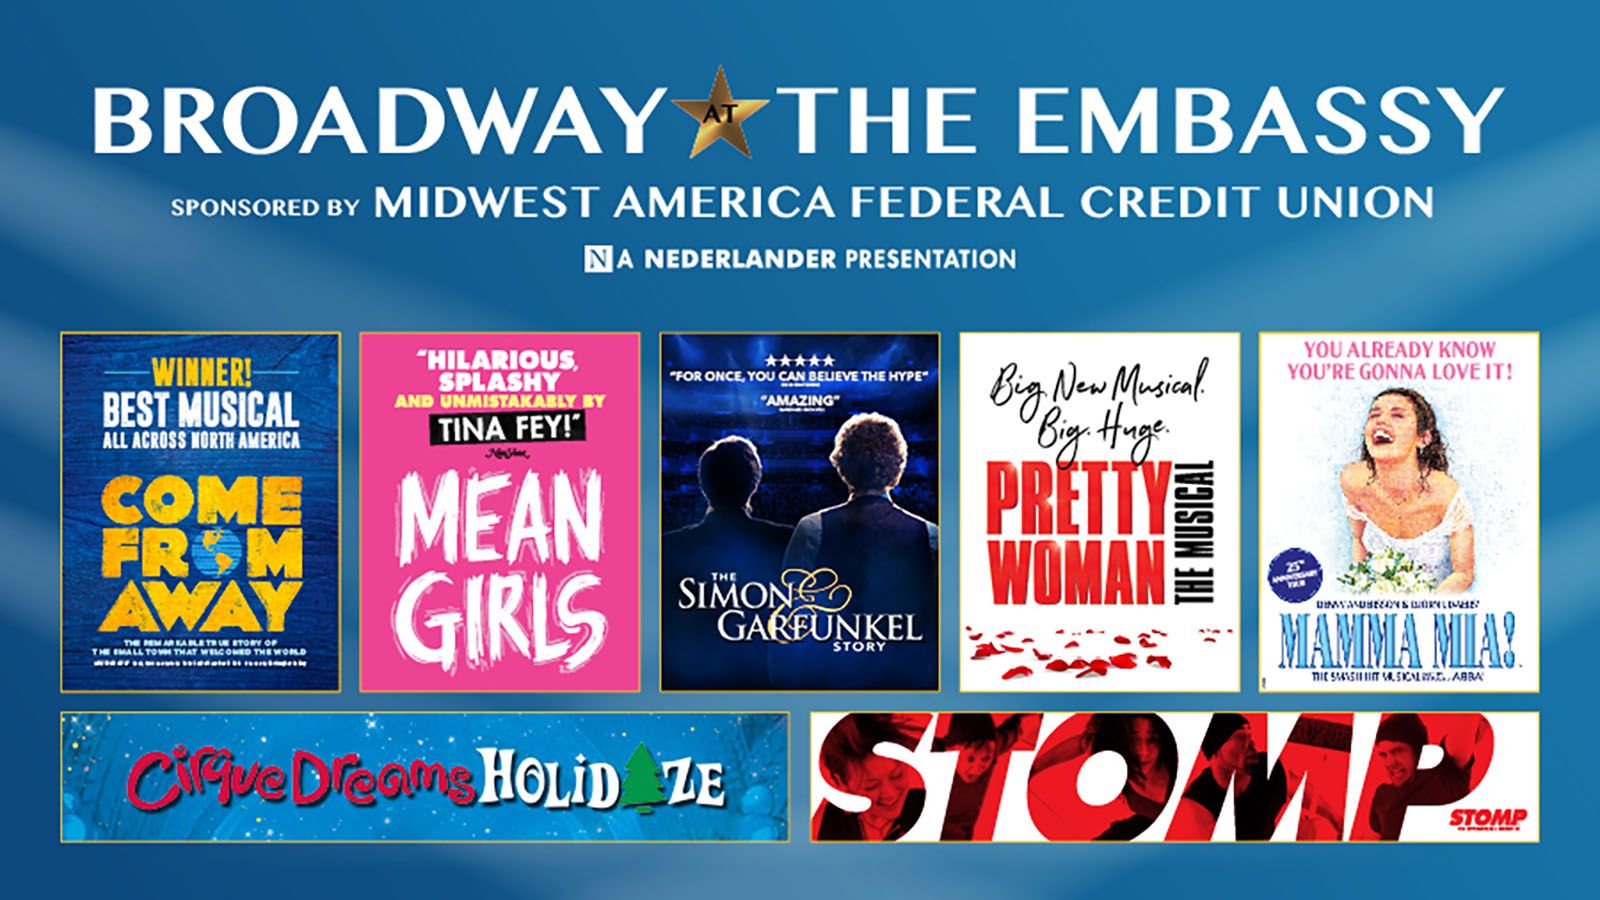 Subscriptions to the Broadway at the Embassy series are on sale.